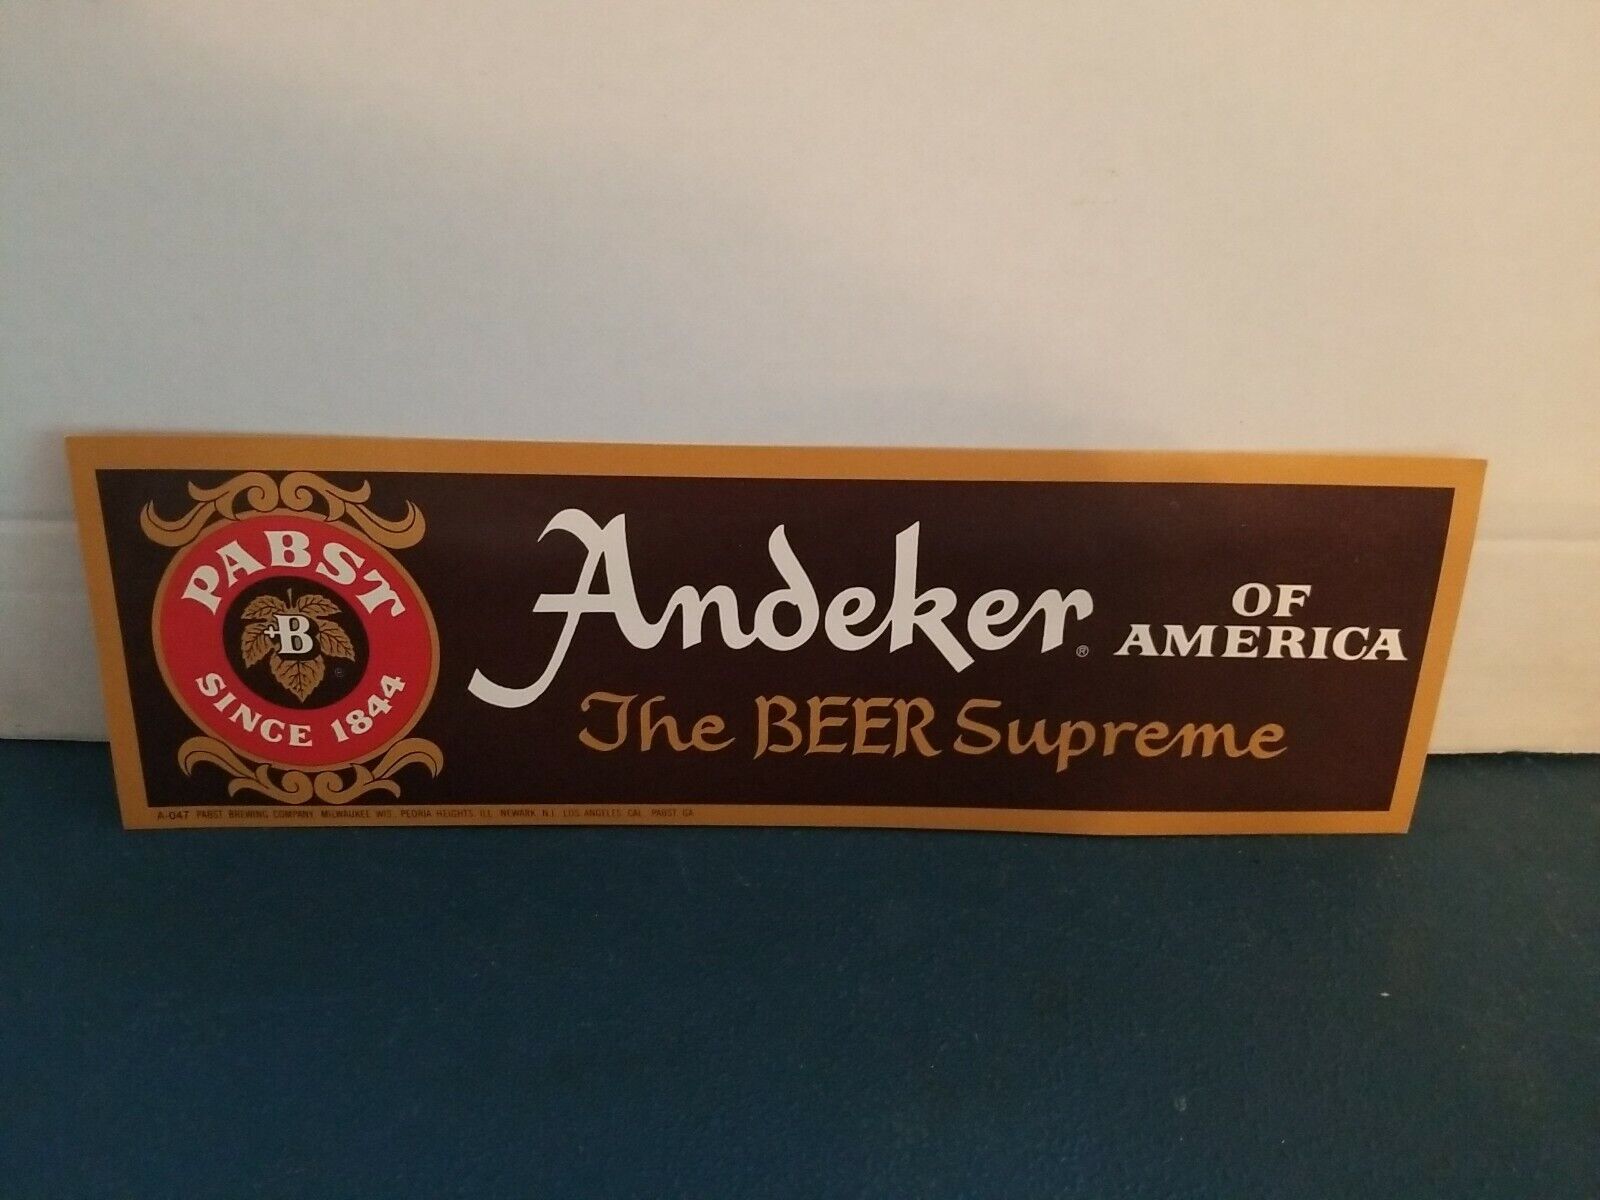 (VTG) 1960s pabst brewery andeker beer sticker bar man cave game room Milwaukee 